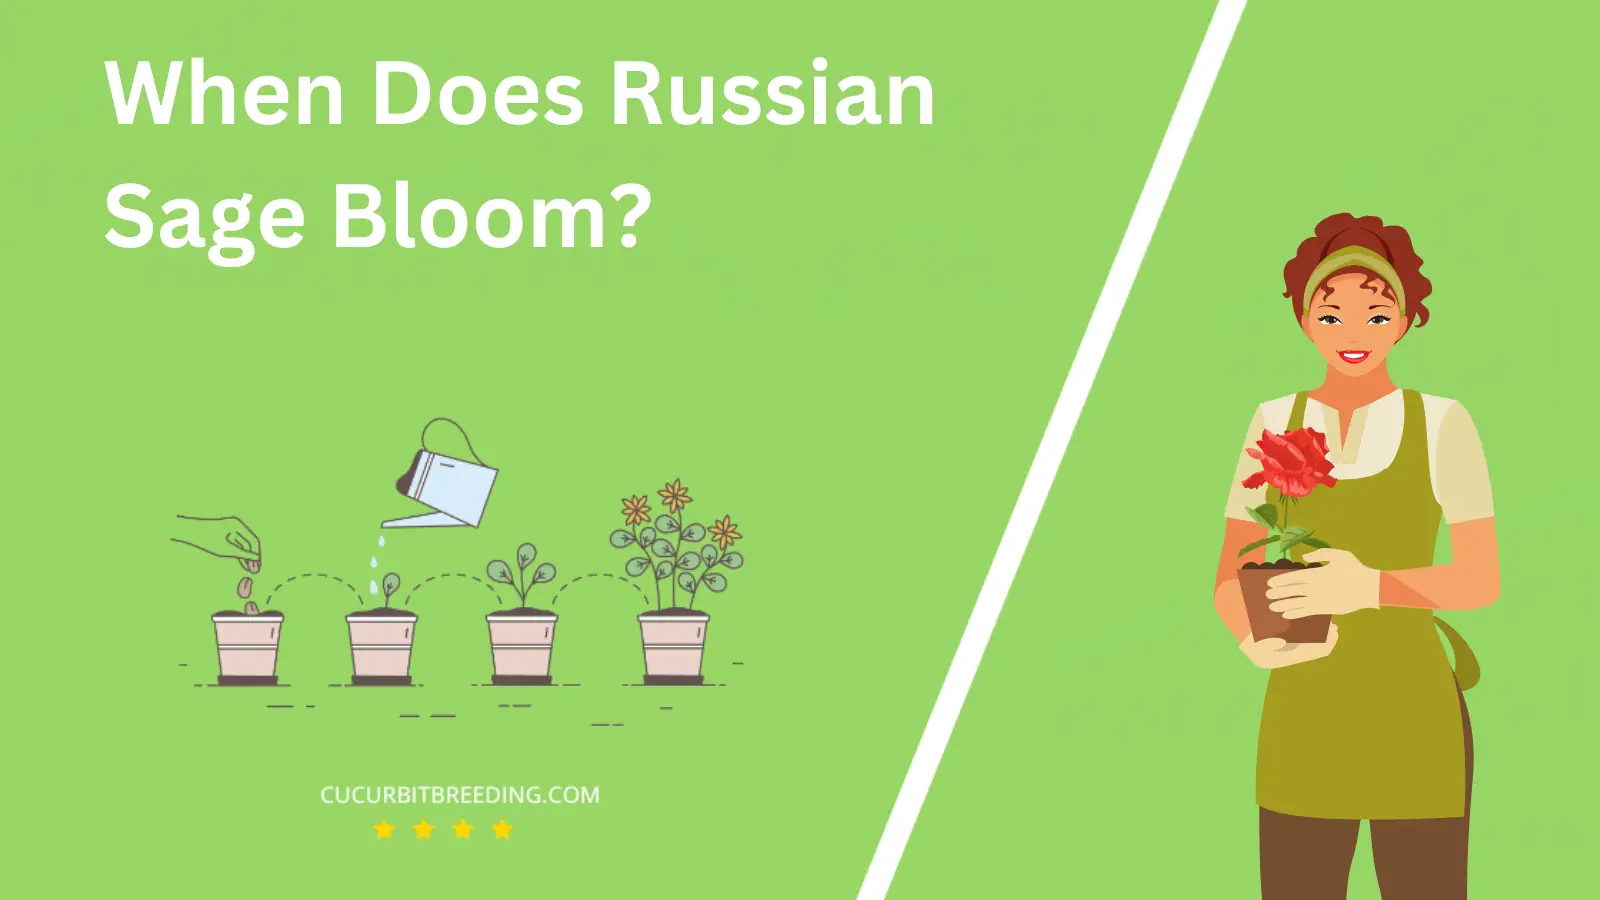 When Does Russian Sage Bloom?